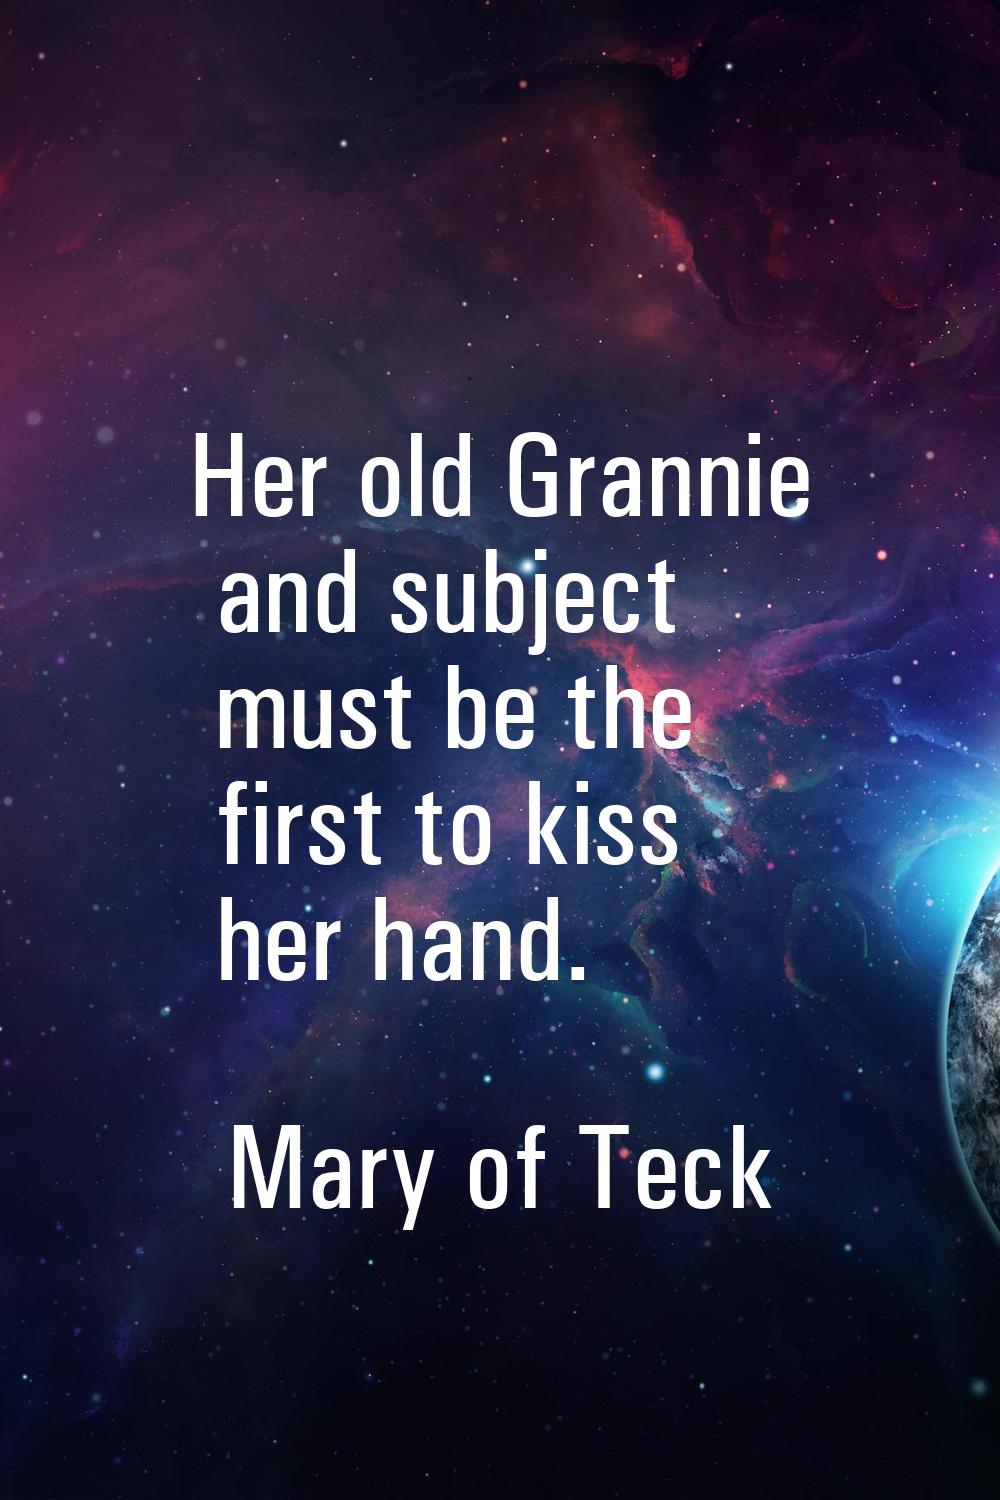 Her old Grannie and subject must be the first to kiss her hand.